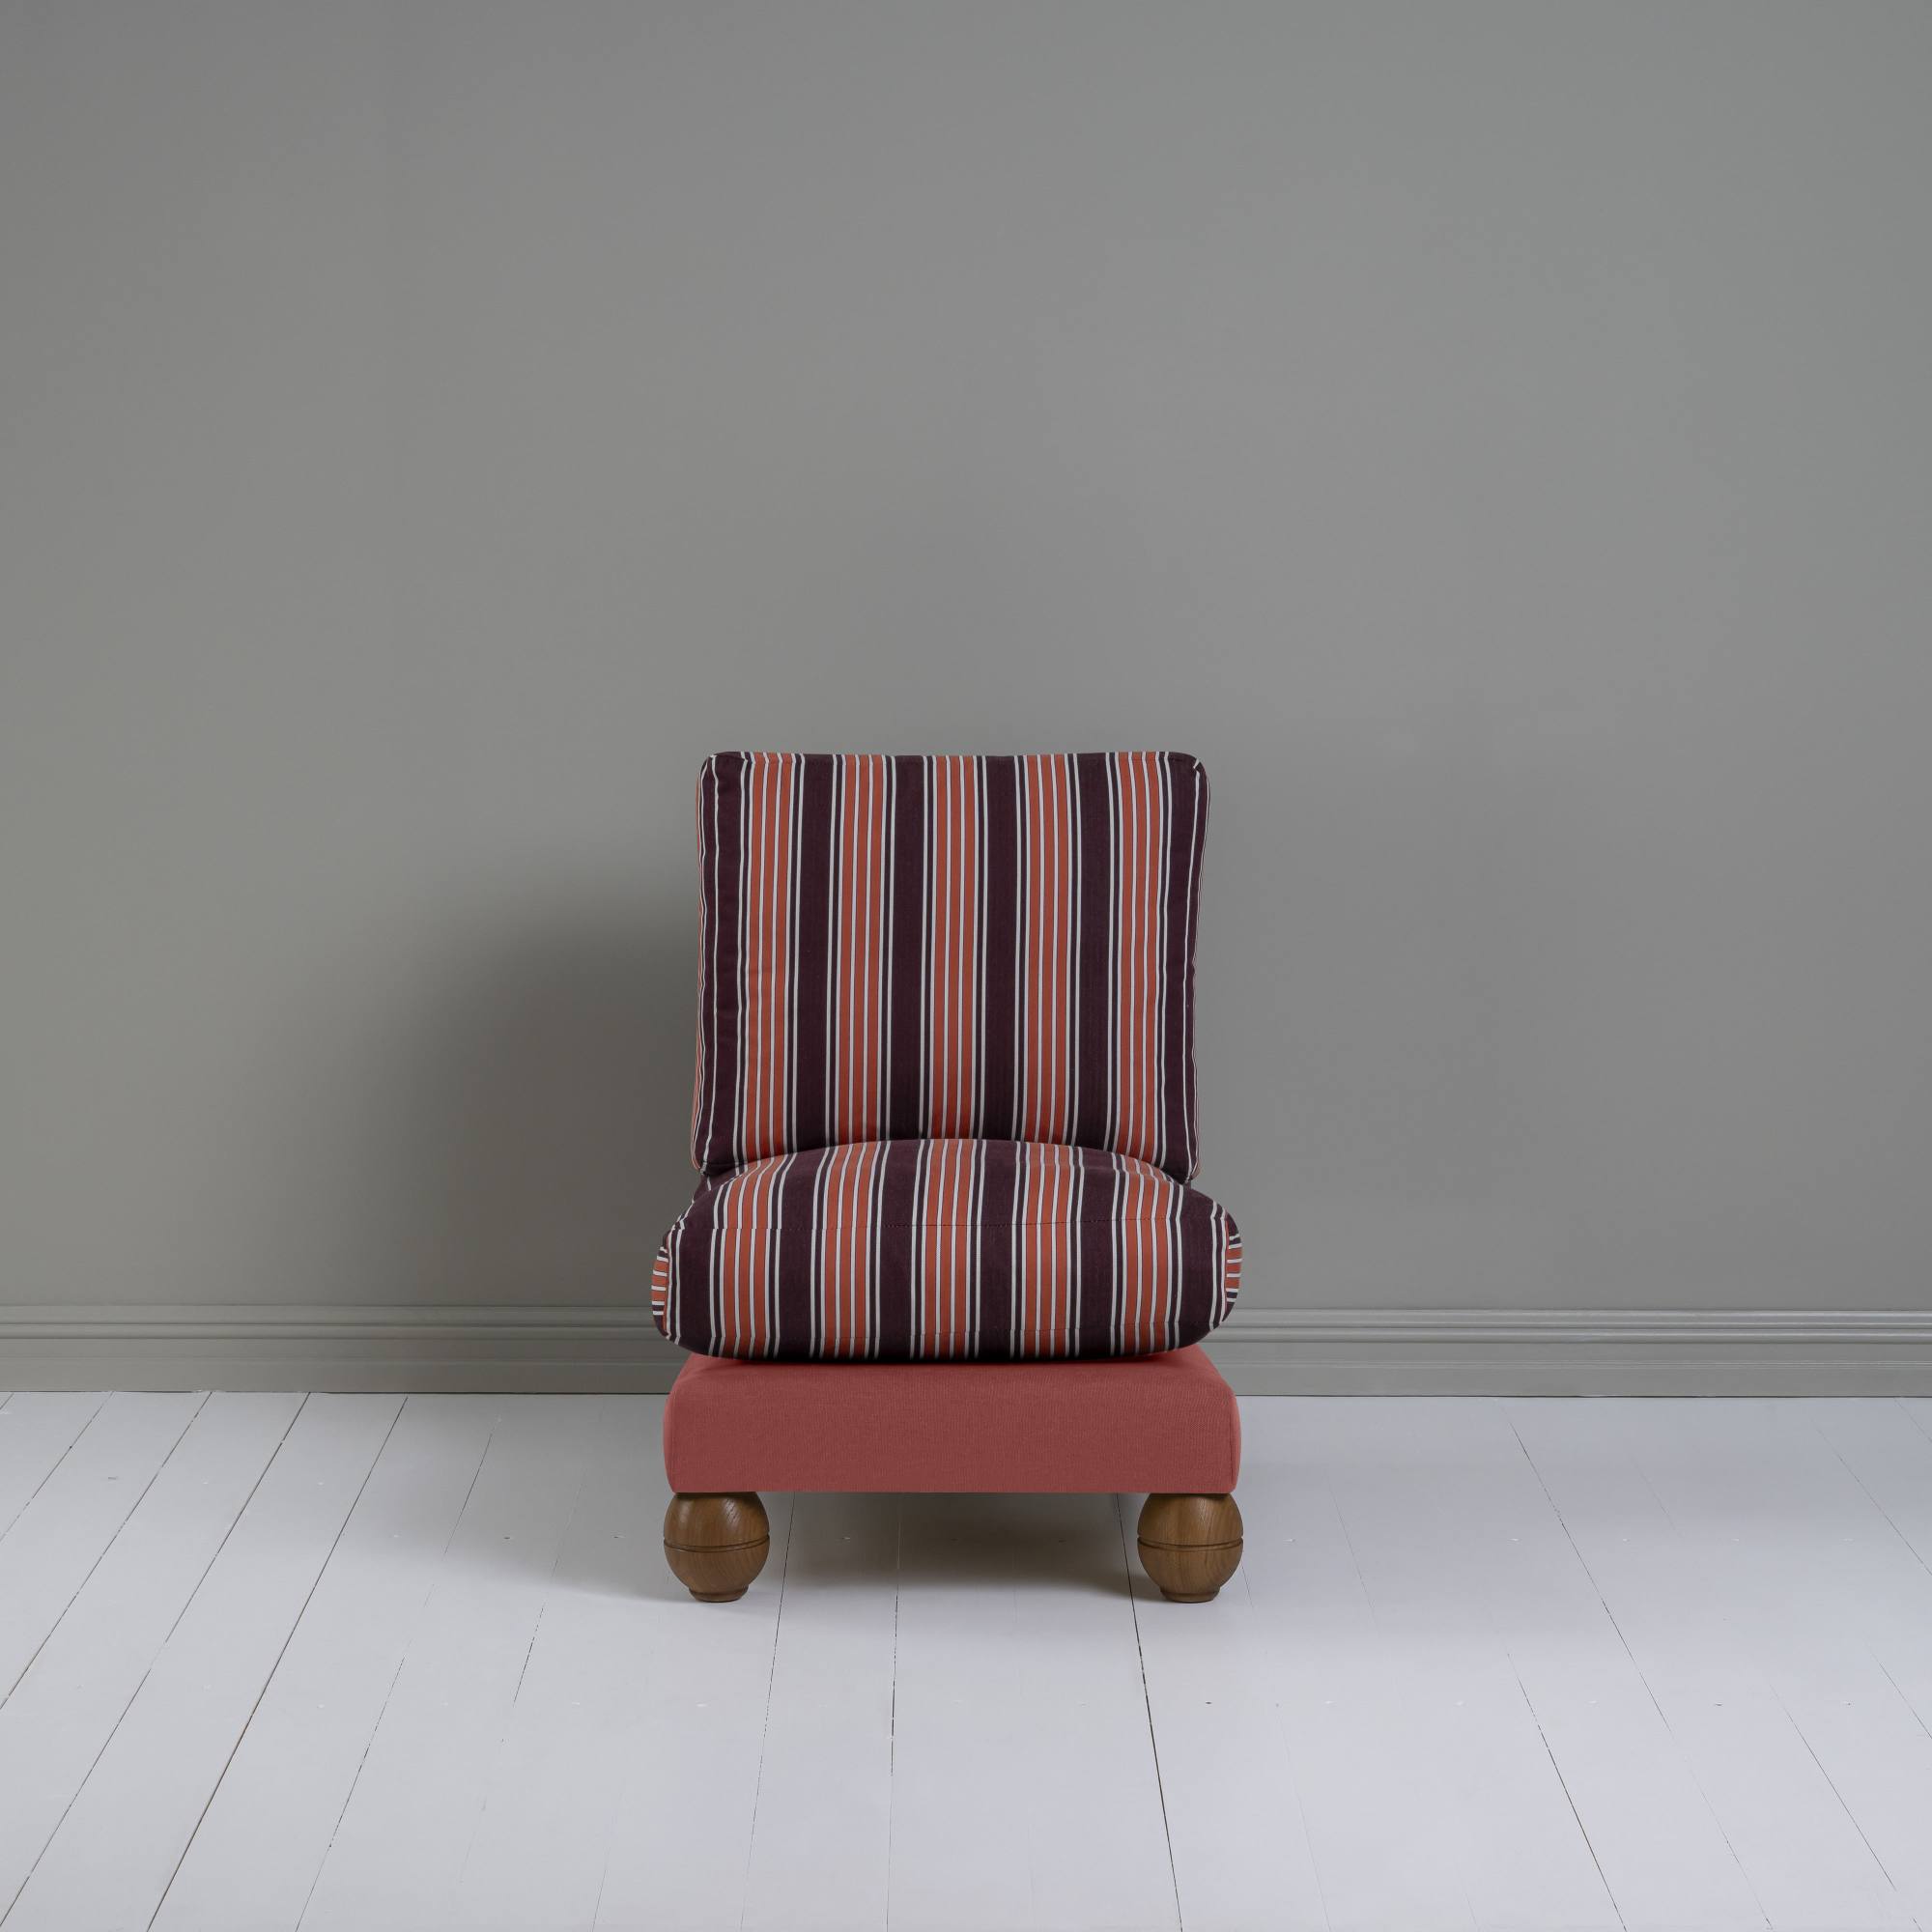  Perch Slipper Armchair in Laidback Linen Rouge Frame, with Regatta Cotton, Flame Seat 